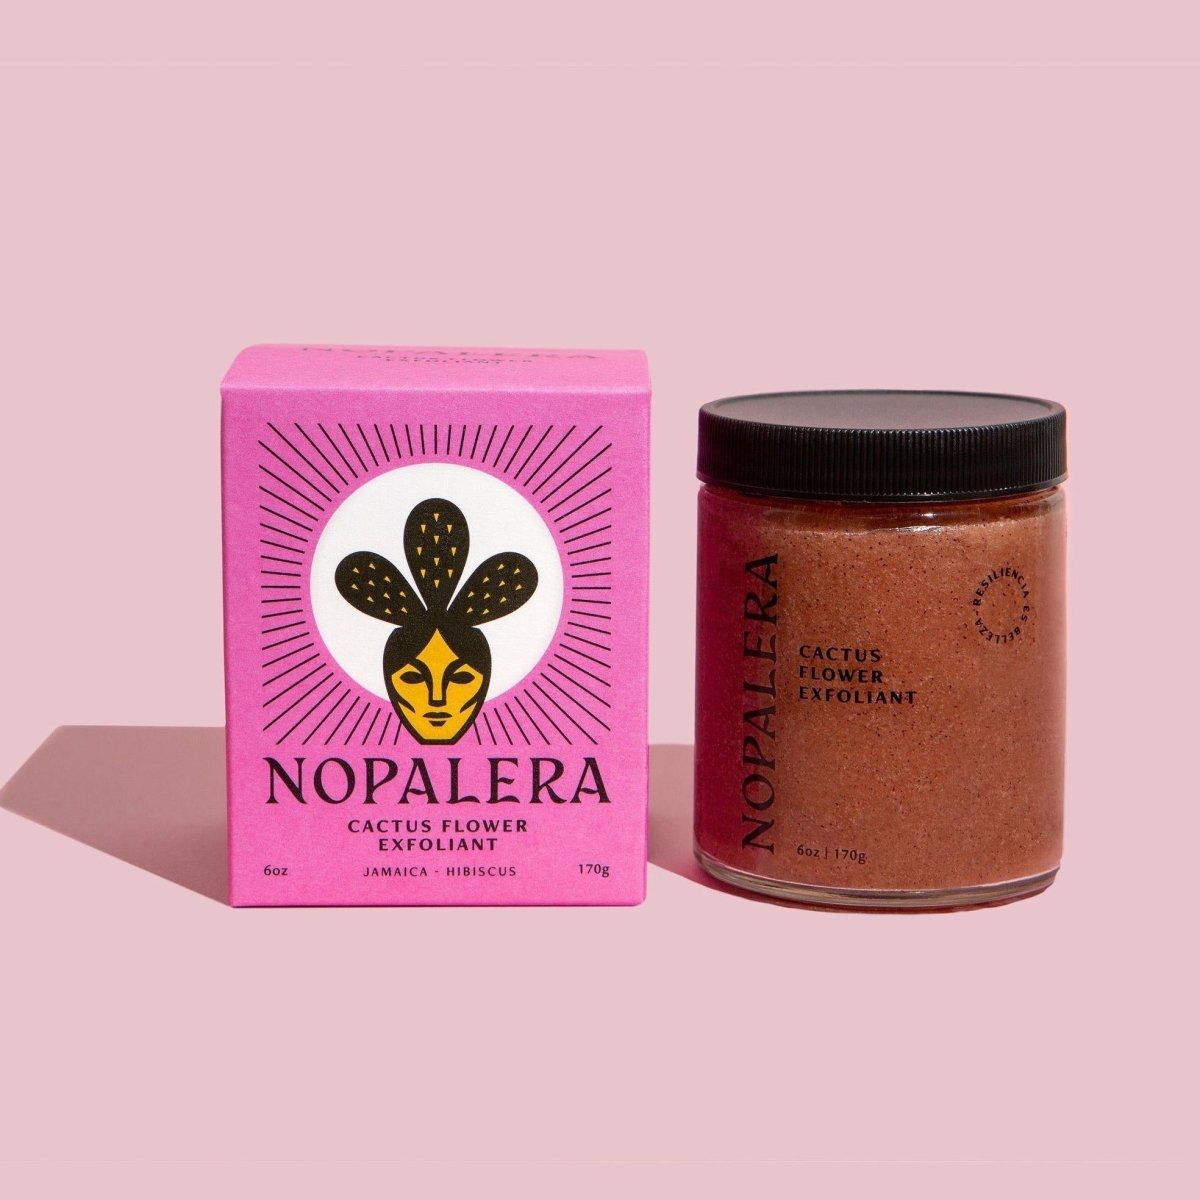 A glass jar of a pink exfoliant mixture sits to the right of a pink box with a cactus and facial illustration. The Cactus Flower Exfoliant is from Nopalera and made in Brooklyn, NY.